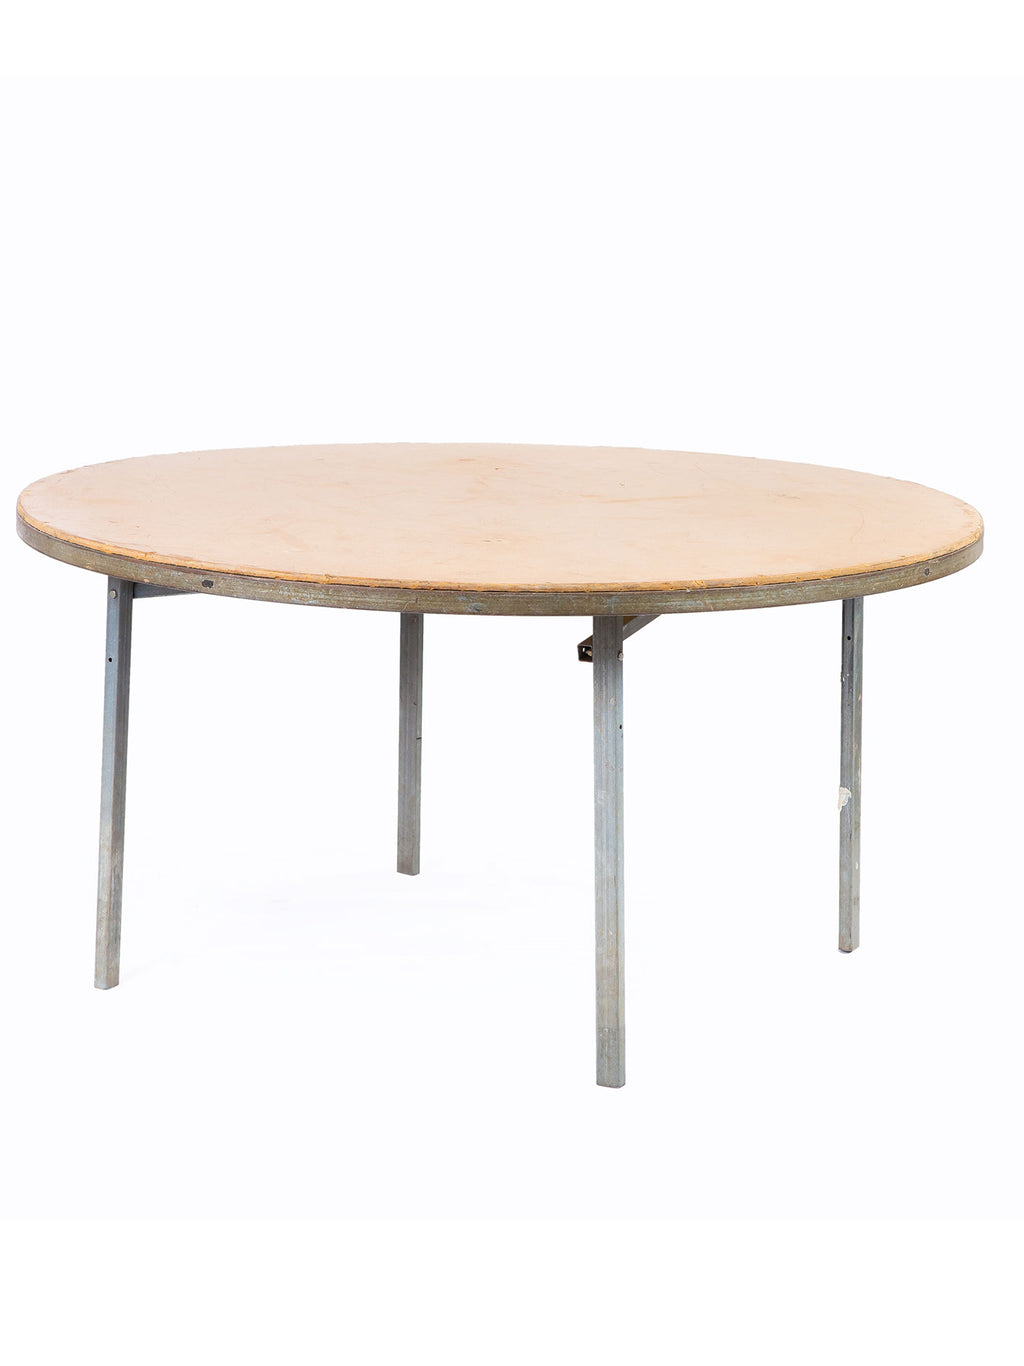 Round 6ft Table